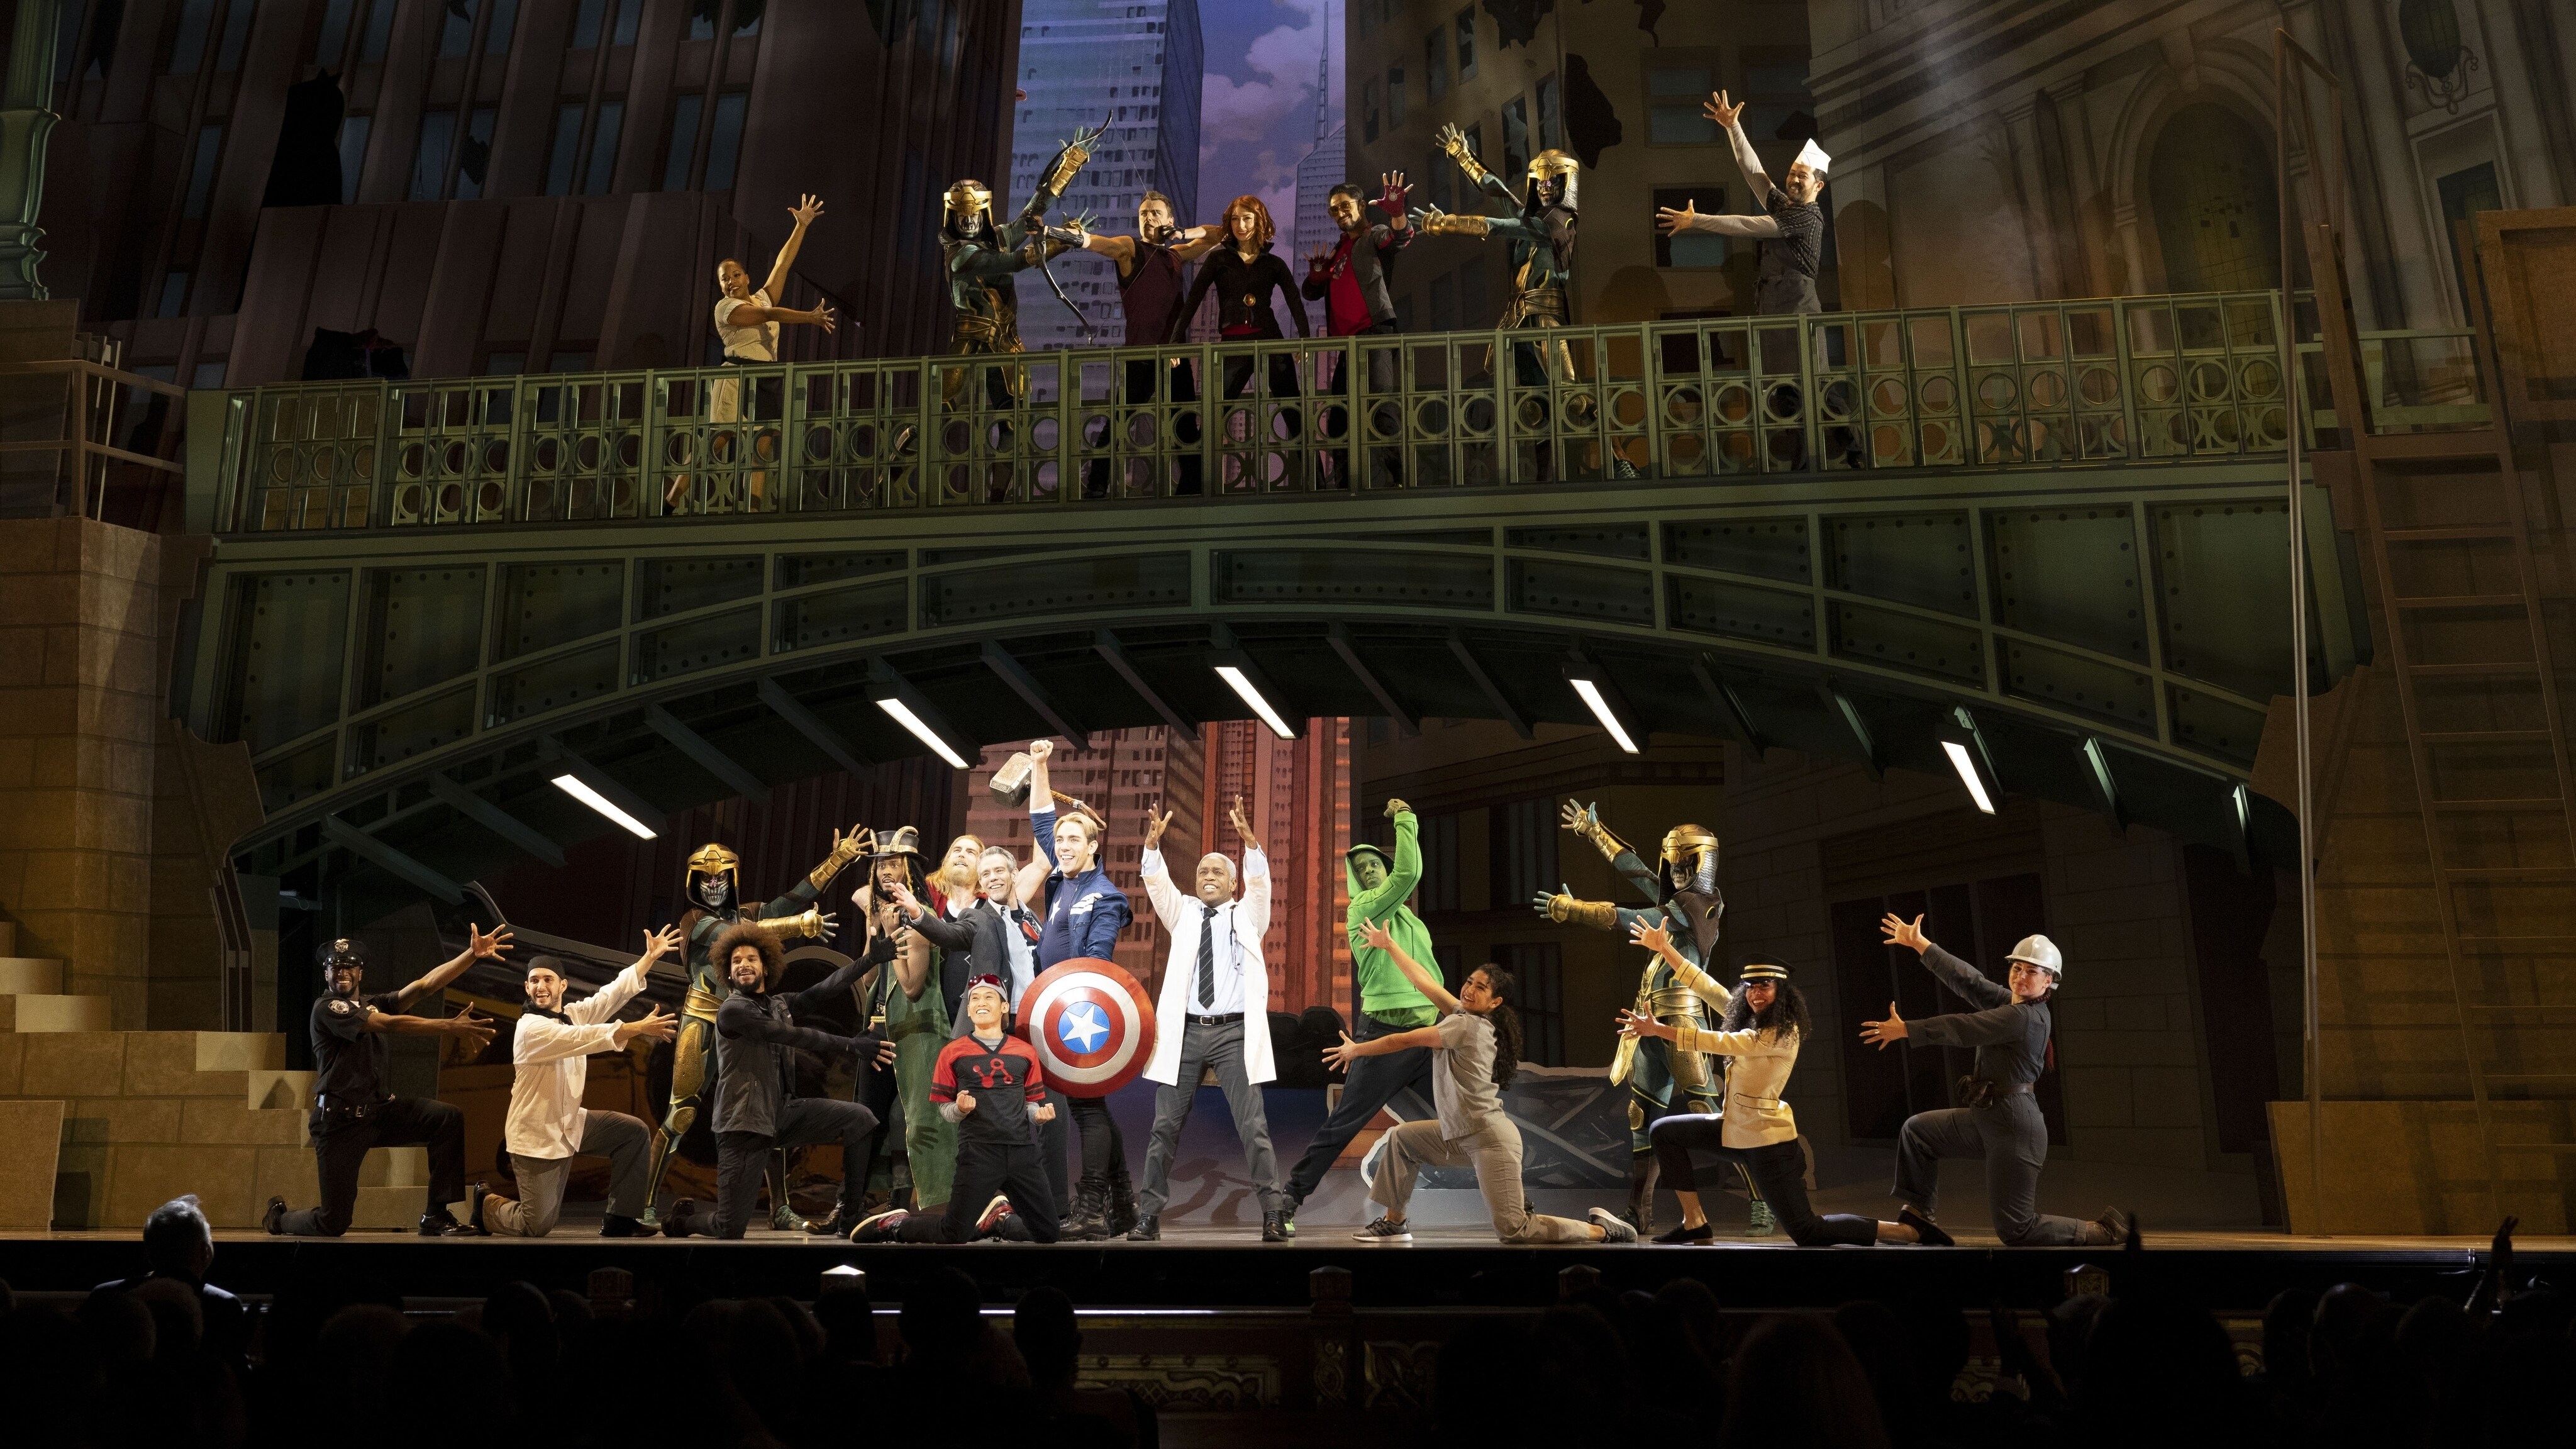 Avery Gillham as Musical Hawkeye, Meghan Manning as Musical Black Widow, Aaron Nedrick as Musical Iron Man, Jason Scott Macdonald as Musical Thor, Adam Pascal as lead, Nico Dejesus as Musical Ant-Man, Tom Feeney as Musical Captain America, Ty Taylor as lead, and Harris Turner as Musical Hulk in a scene still from Marvel Studios' HAWKEYE. Photo by Chuck Zlotnick. ©Marvel Studios 2021. All Rights Reserved.